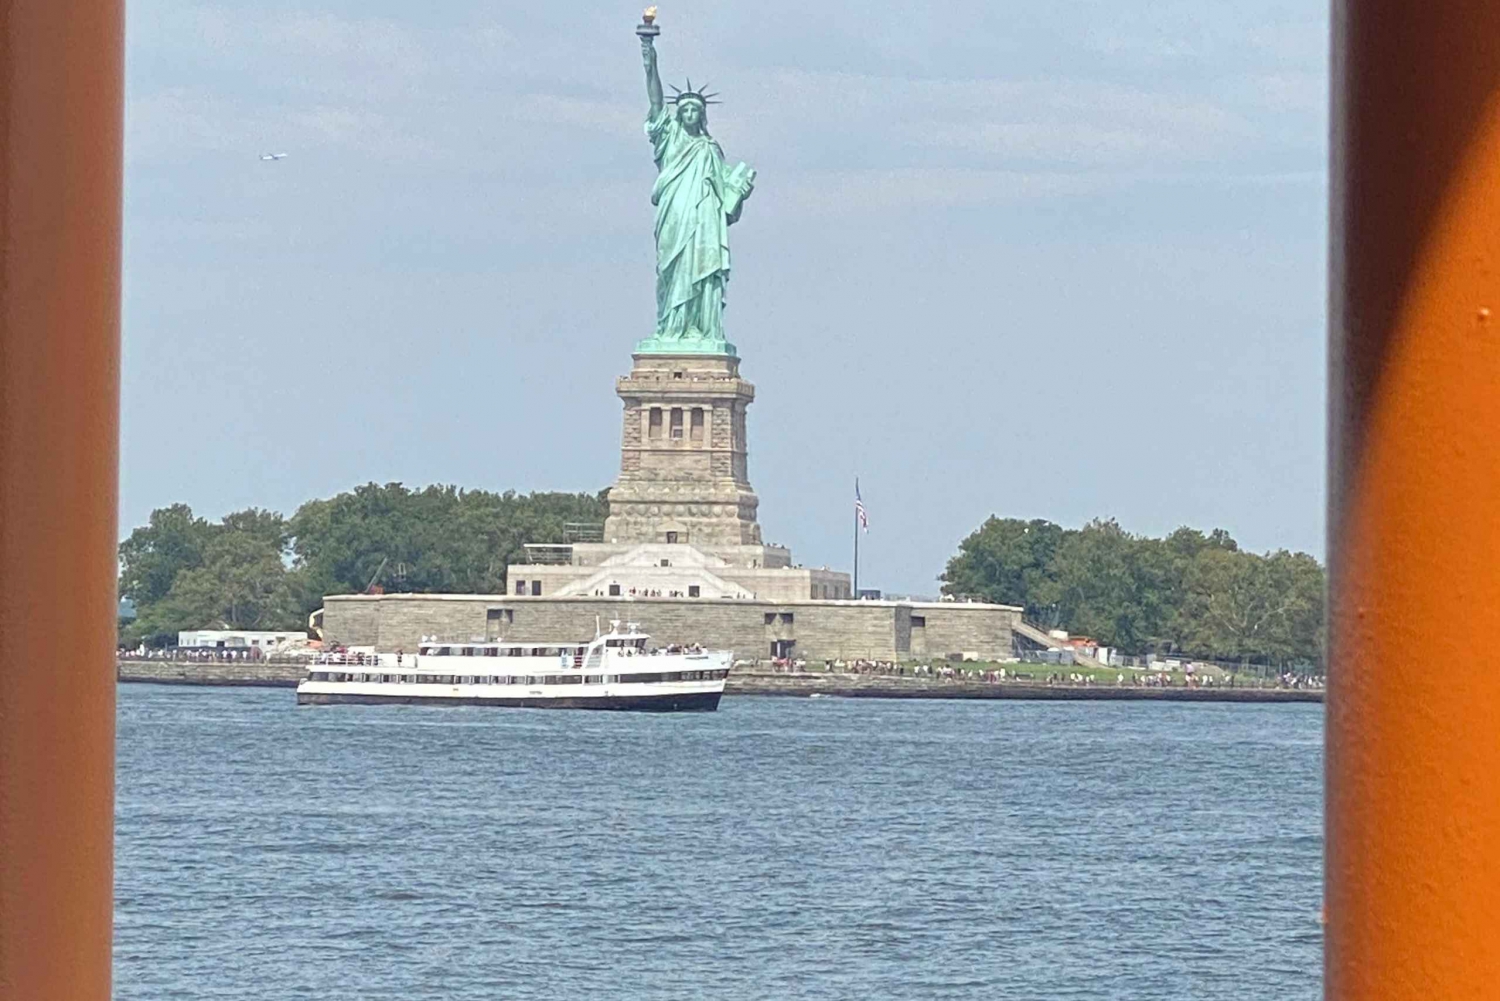 #1 Six Hour Bus Tour and Boat Ride By The Statue of Liberty